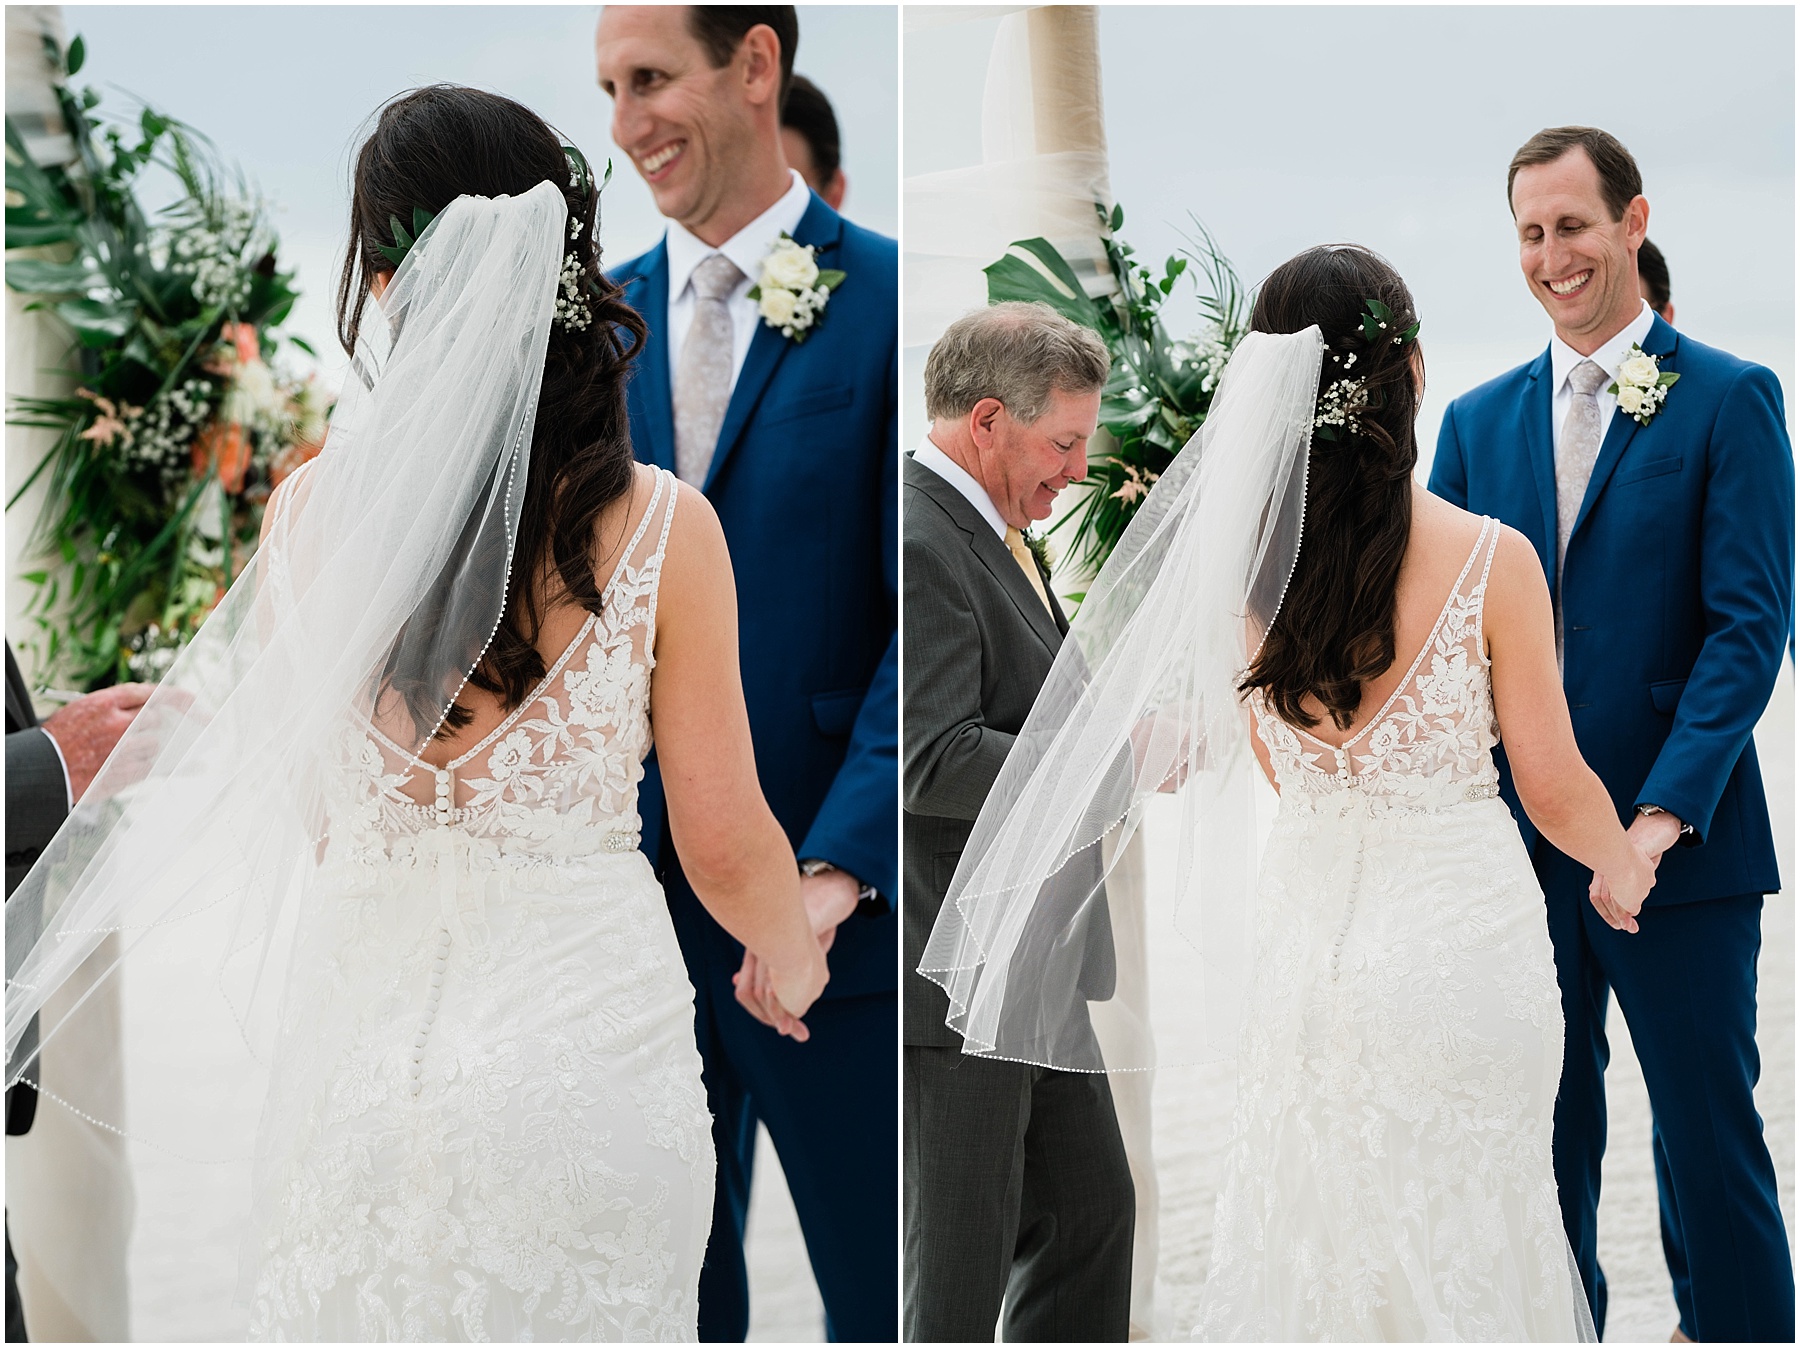 Bride and groom join hands at the altar on wedding day at JW Marriott Marco Island in Florida.